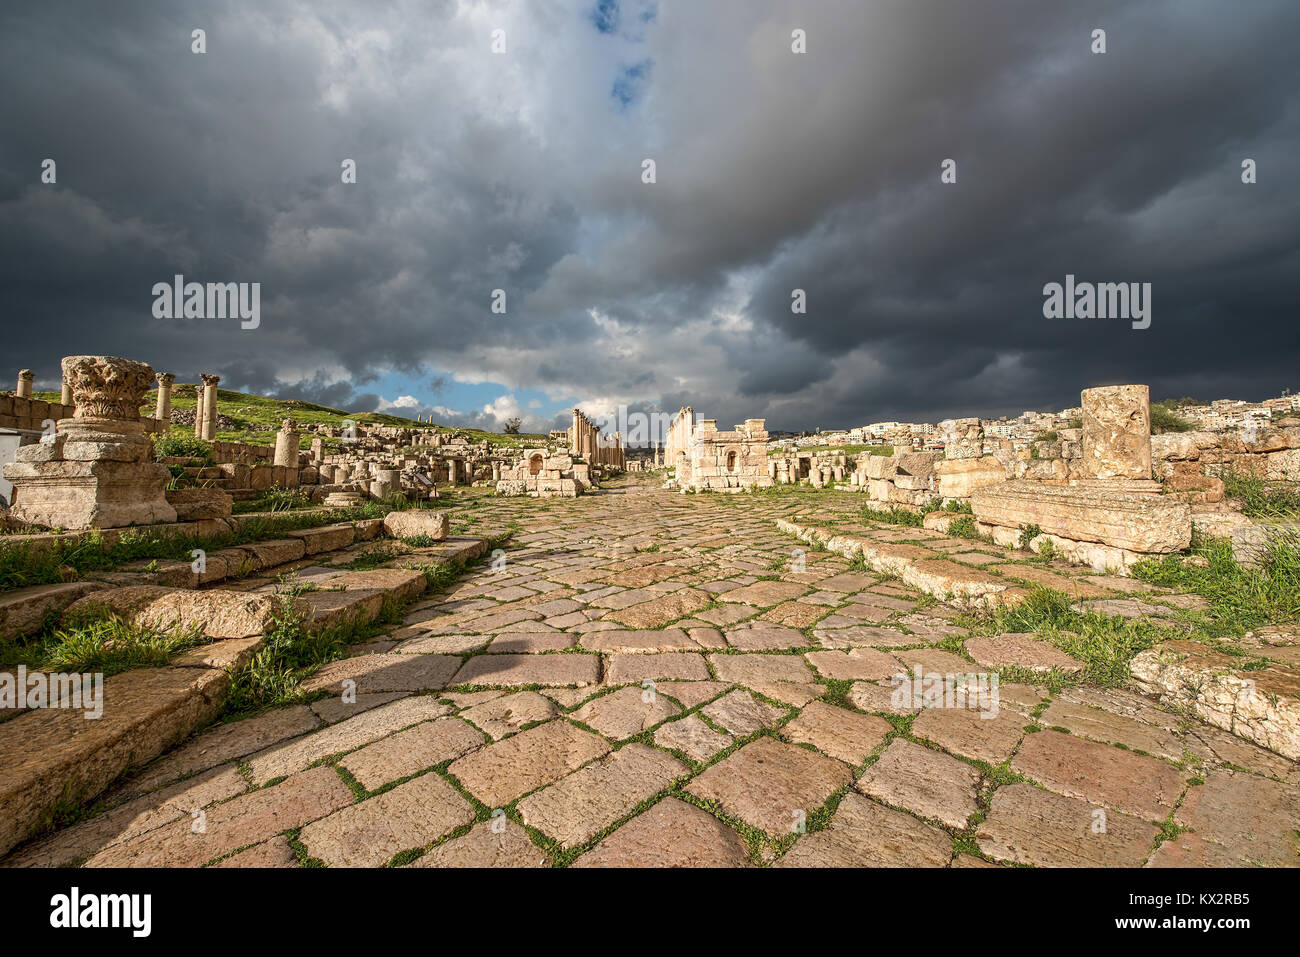 A Roman road in the ancient city of Gerasa after a storm with dark grey clouds Stock Photo